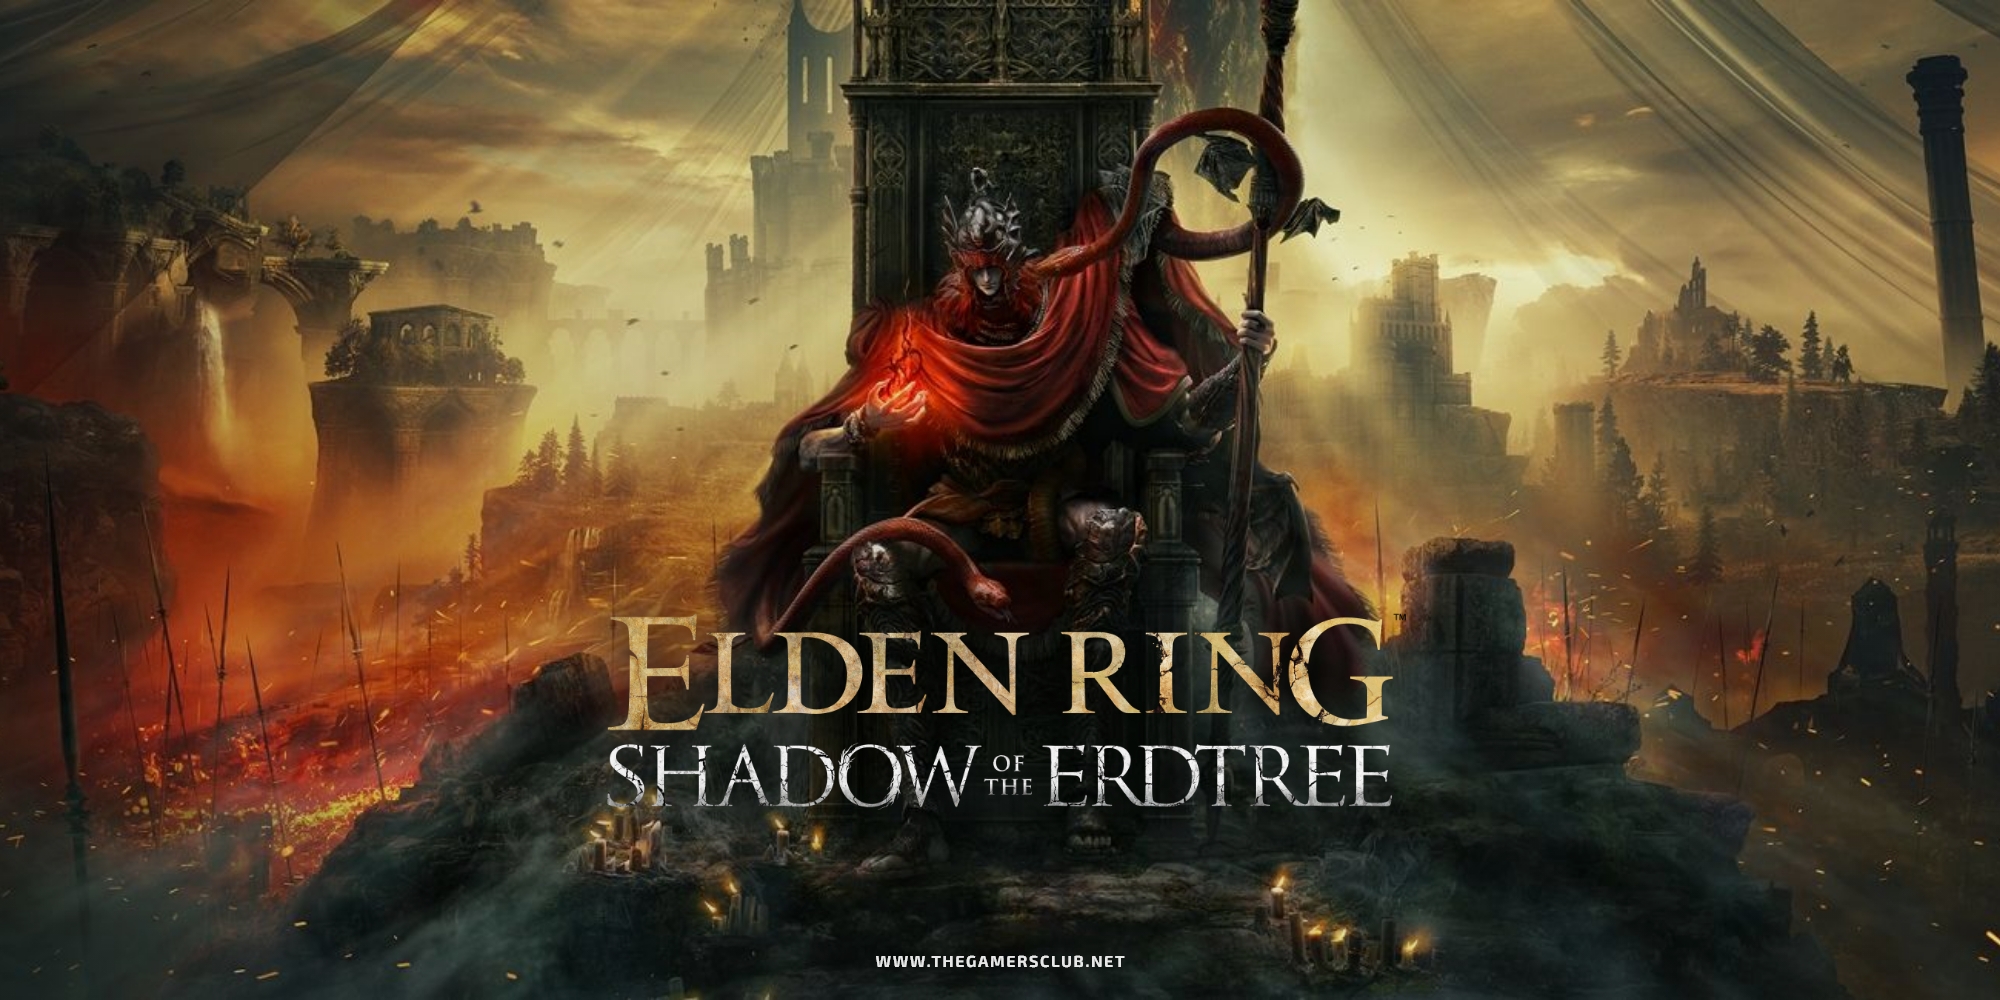 ELDEN RING Shadow of the Erdtree DLC Gameplay Reveal Trailer - The Gamers Club